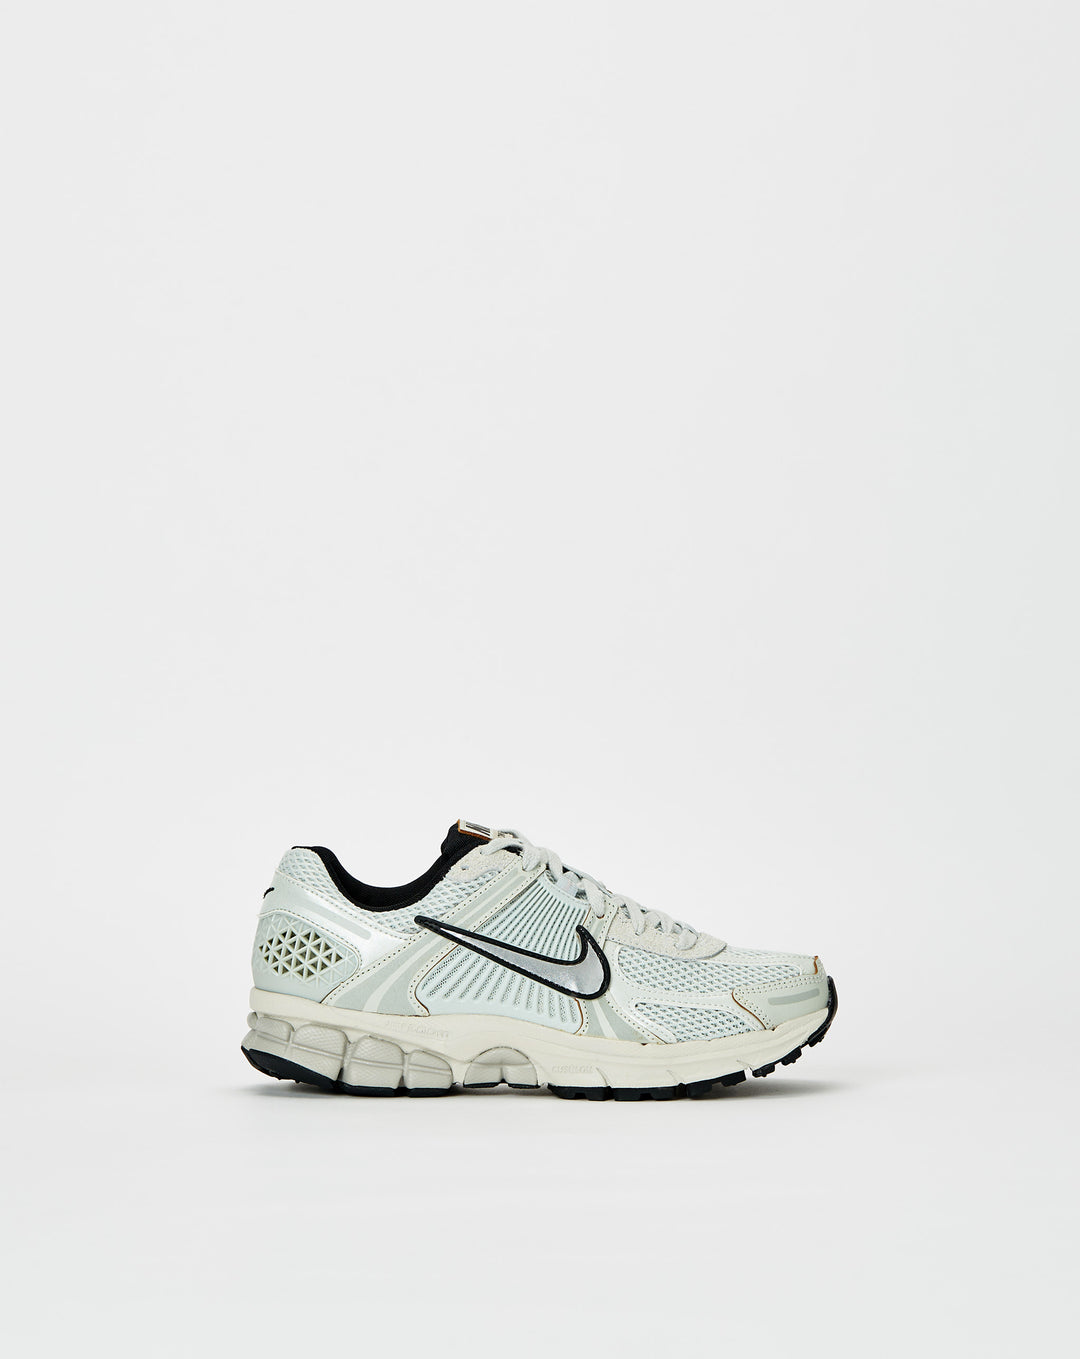 Nike Running With Her Daughter  - Cheap Cerbe Jordan outlet